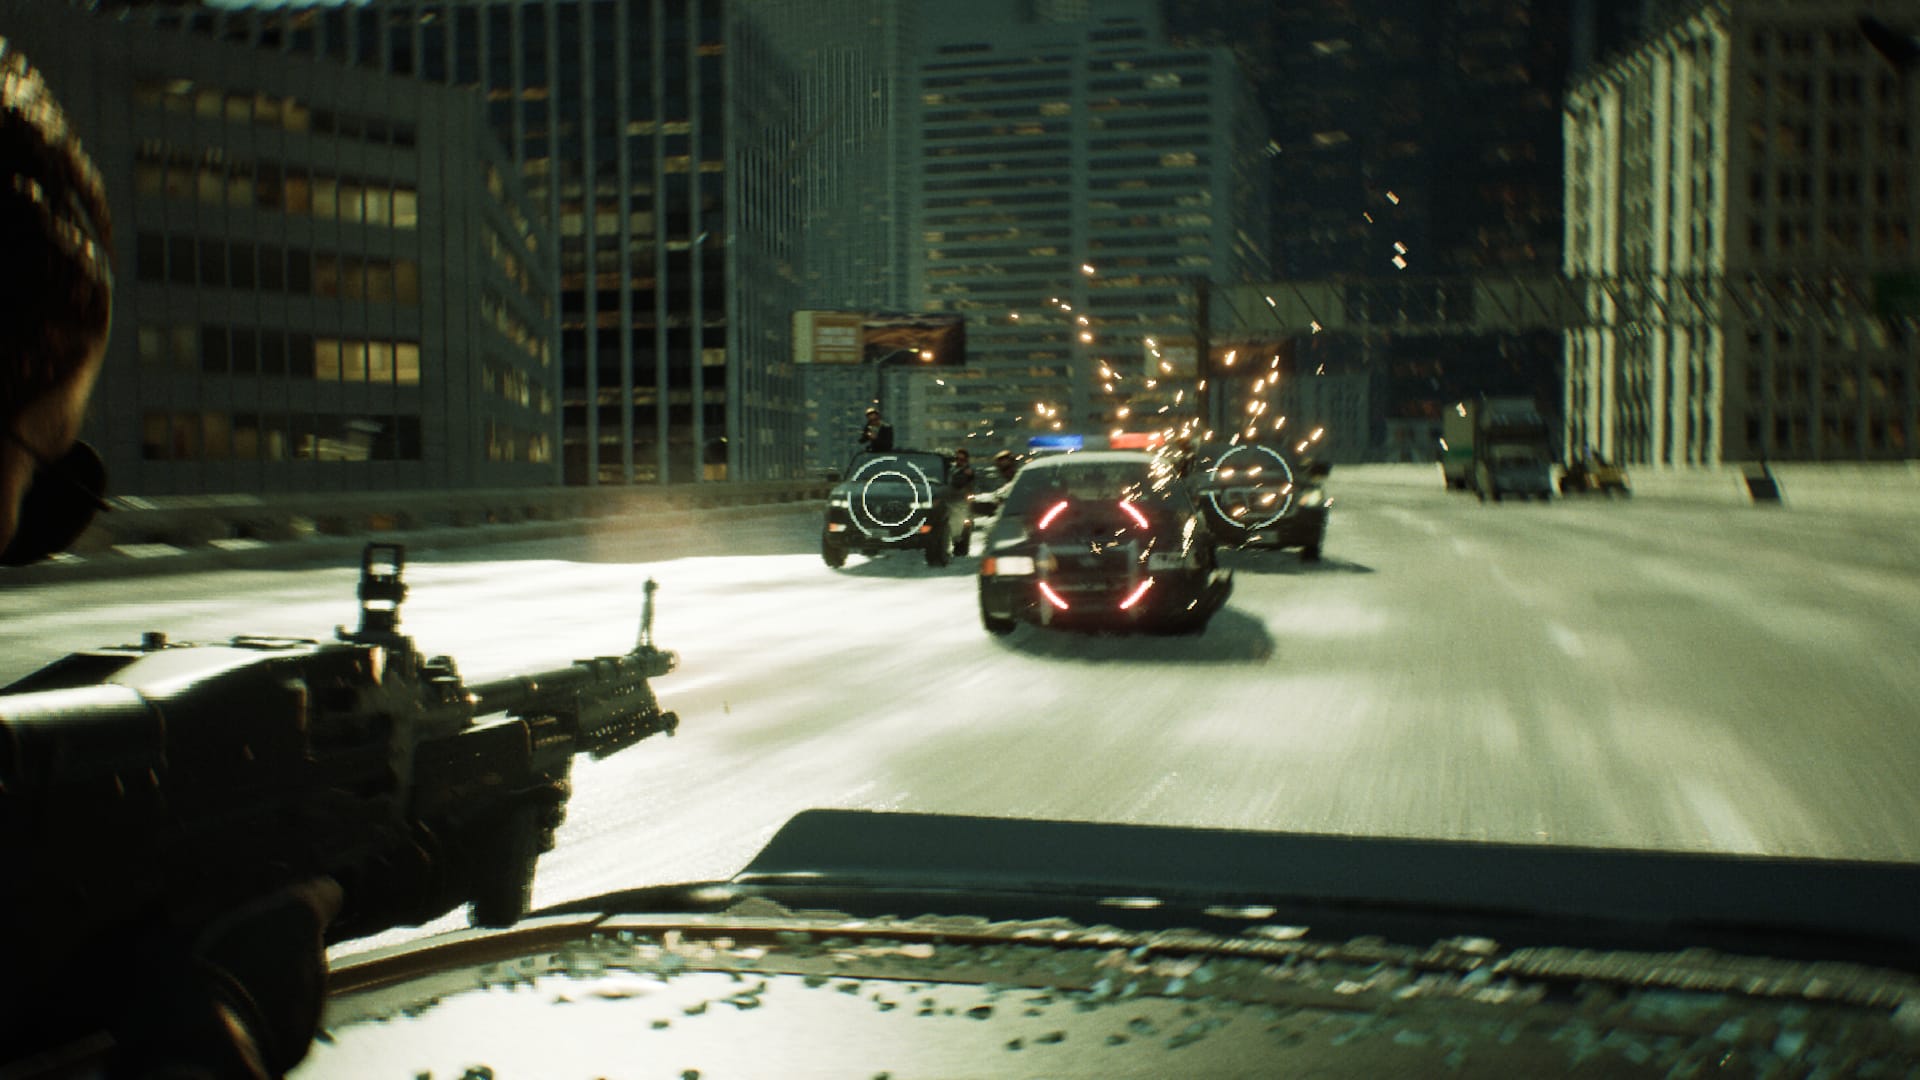 The Matrix Awakens fired at oncoming vehicles